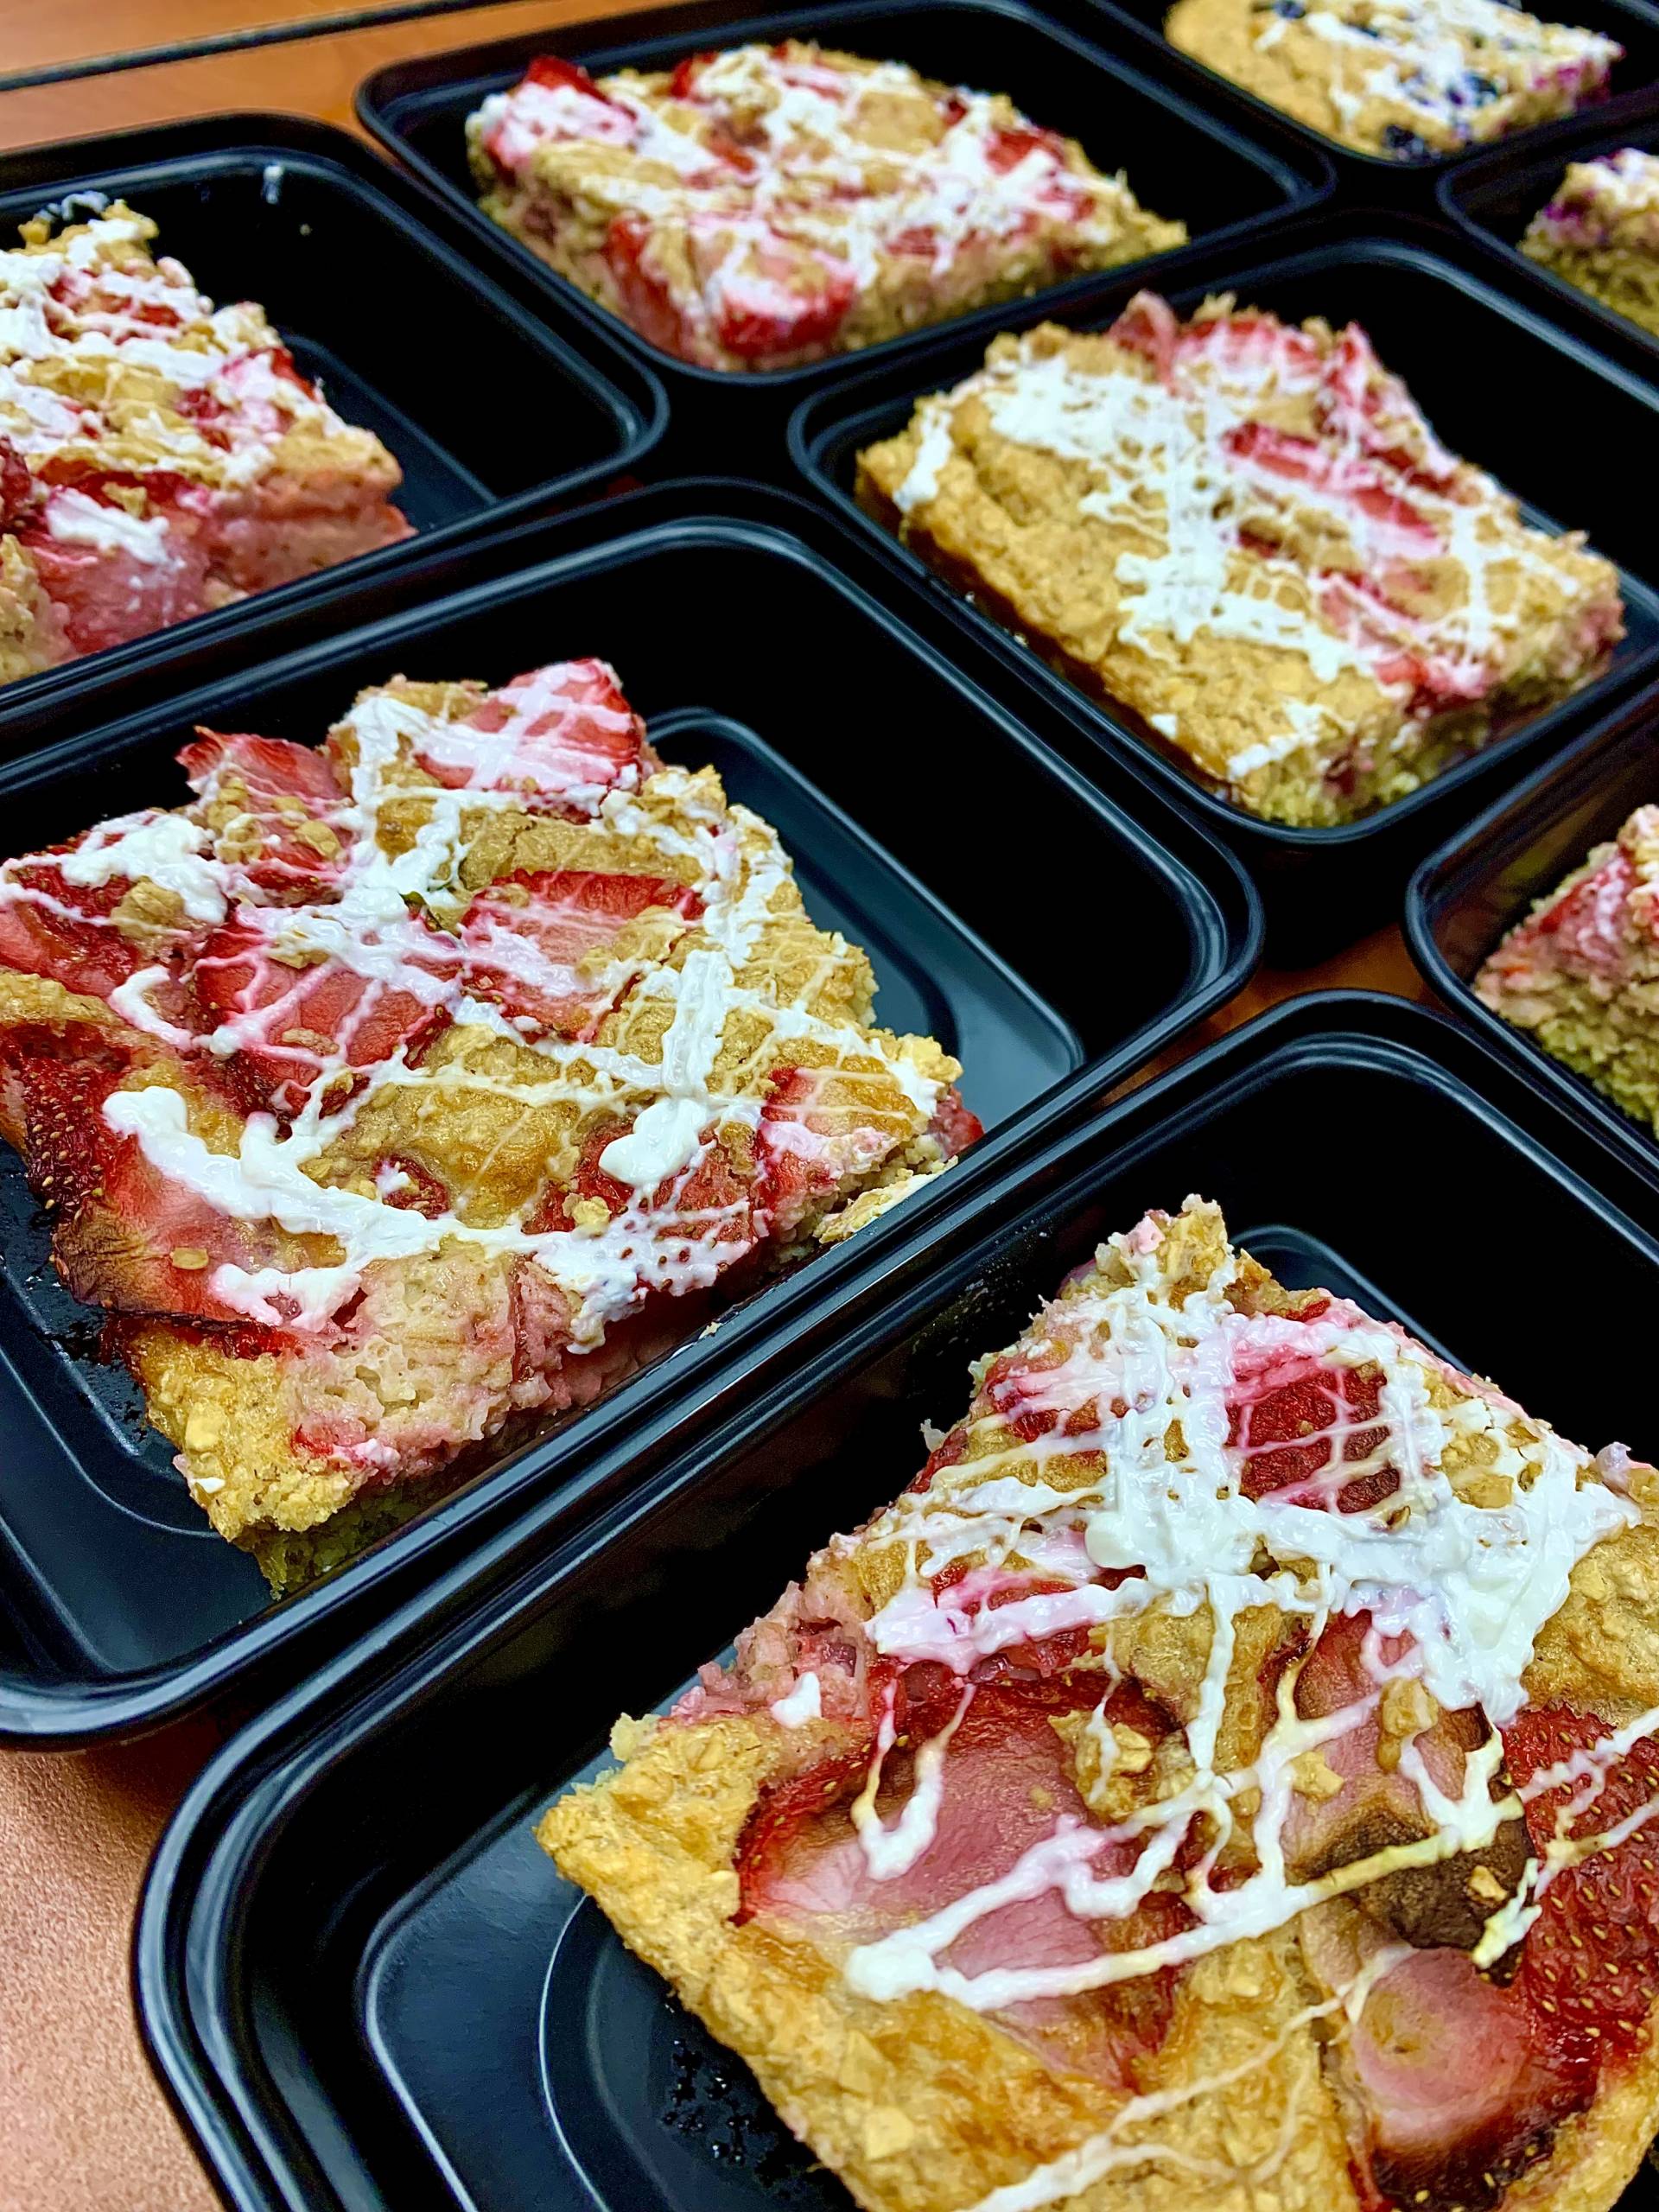 Strawberry Baked Protein Oats